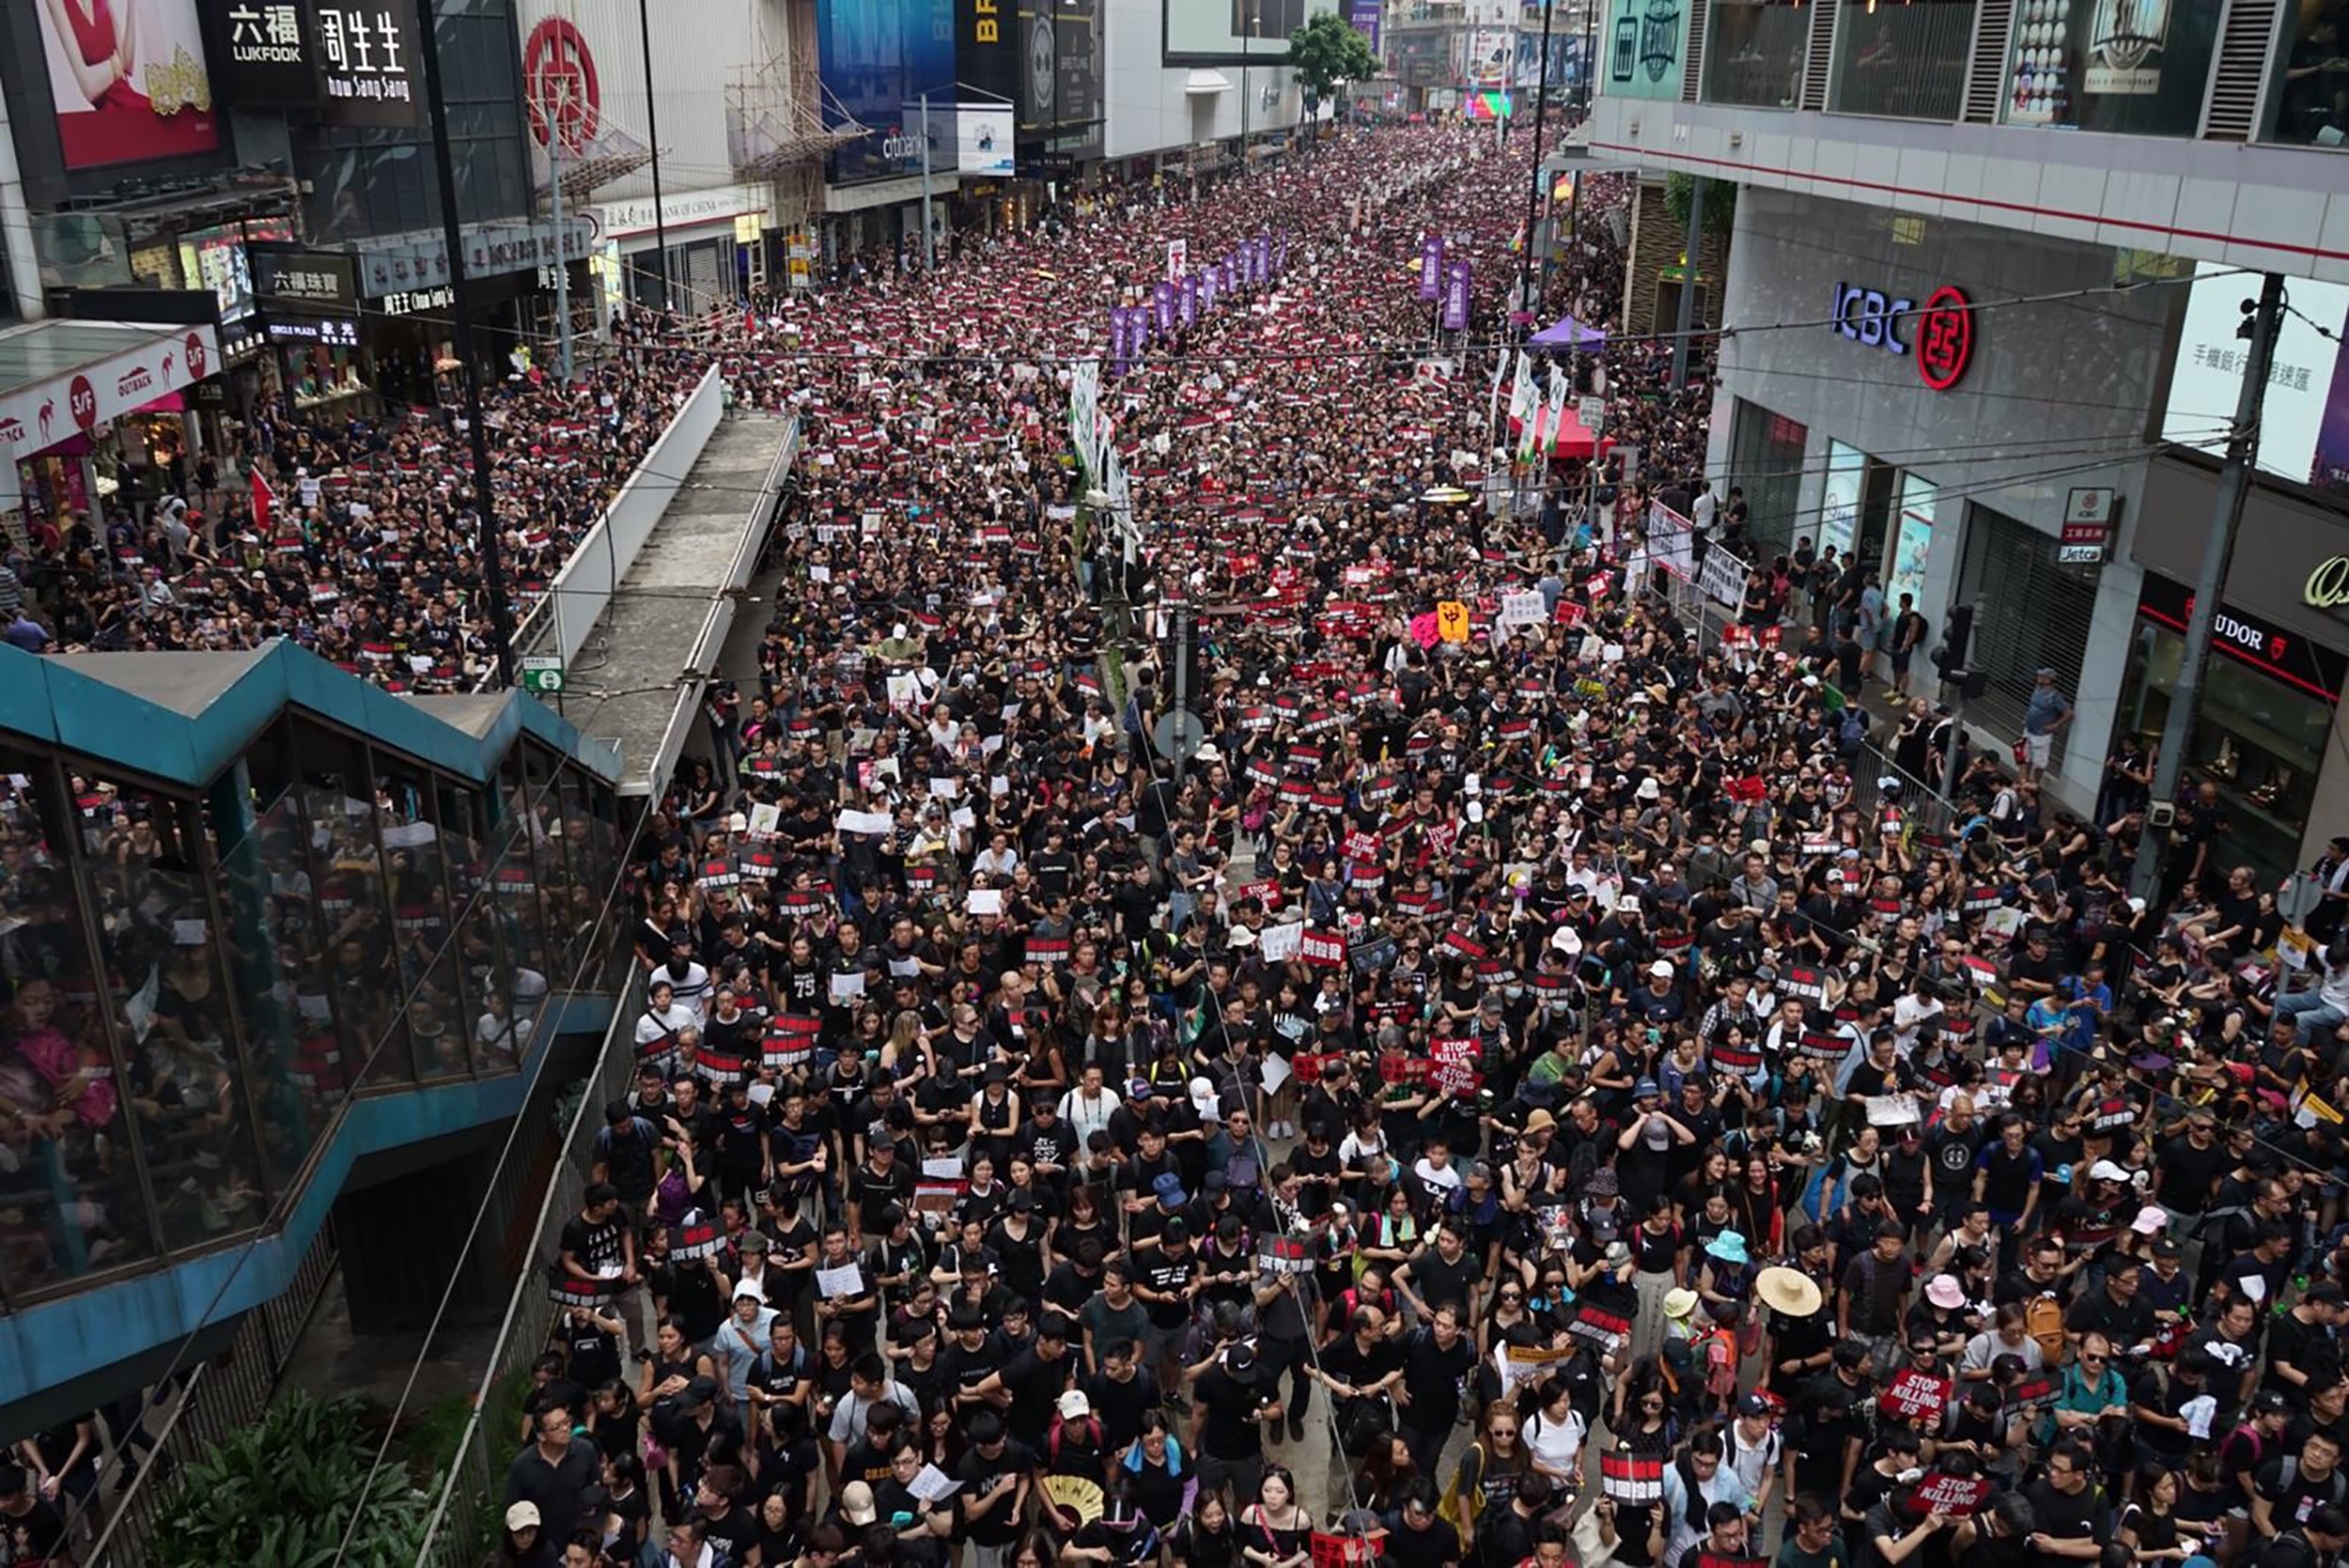 The Hong Kong protests were a “real hot button” issue with Singaporeans this year, according to the pollsters. Photo: Joanne Ma